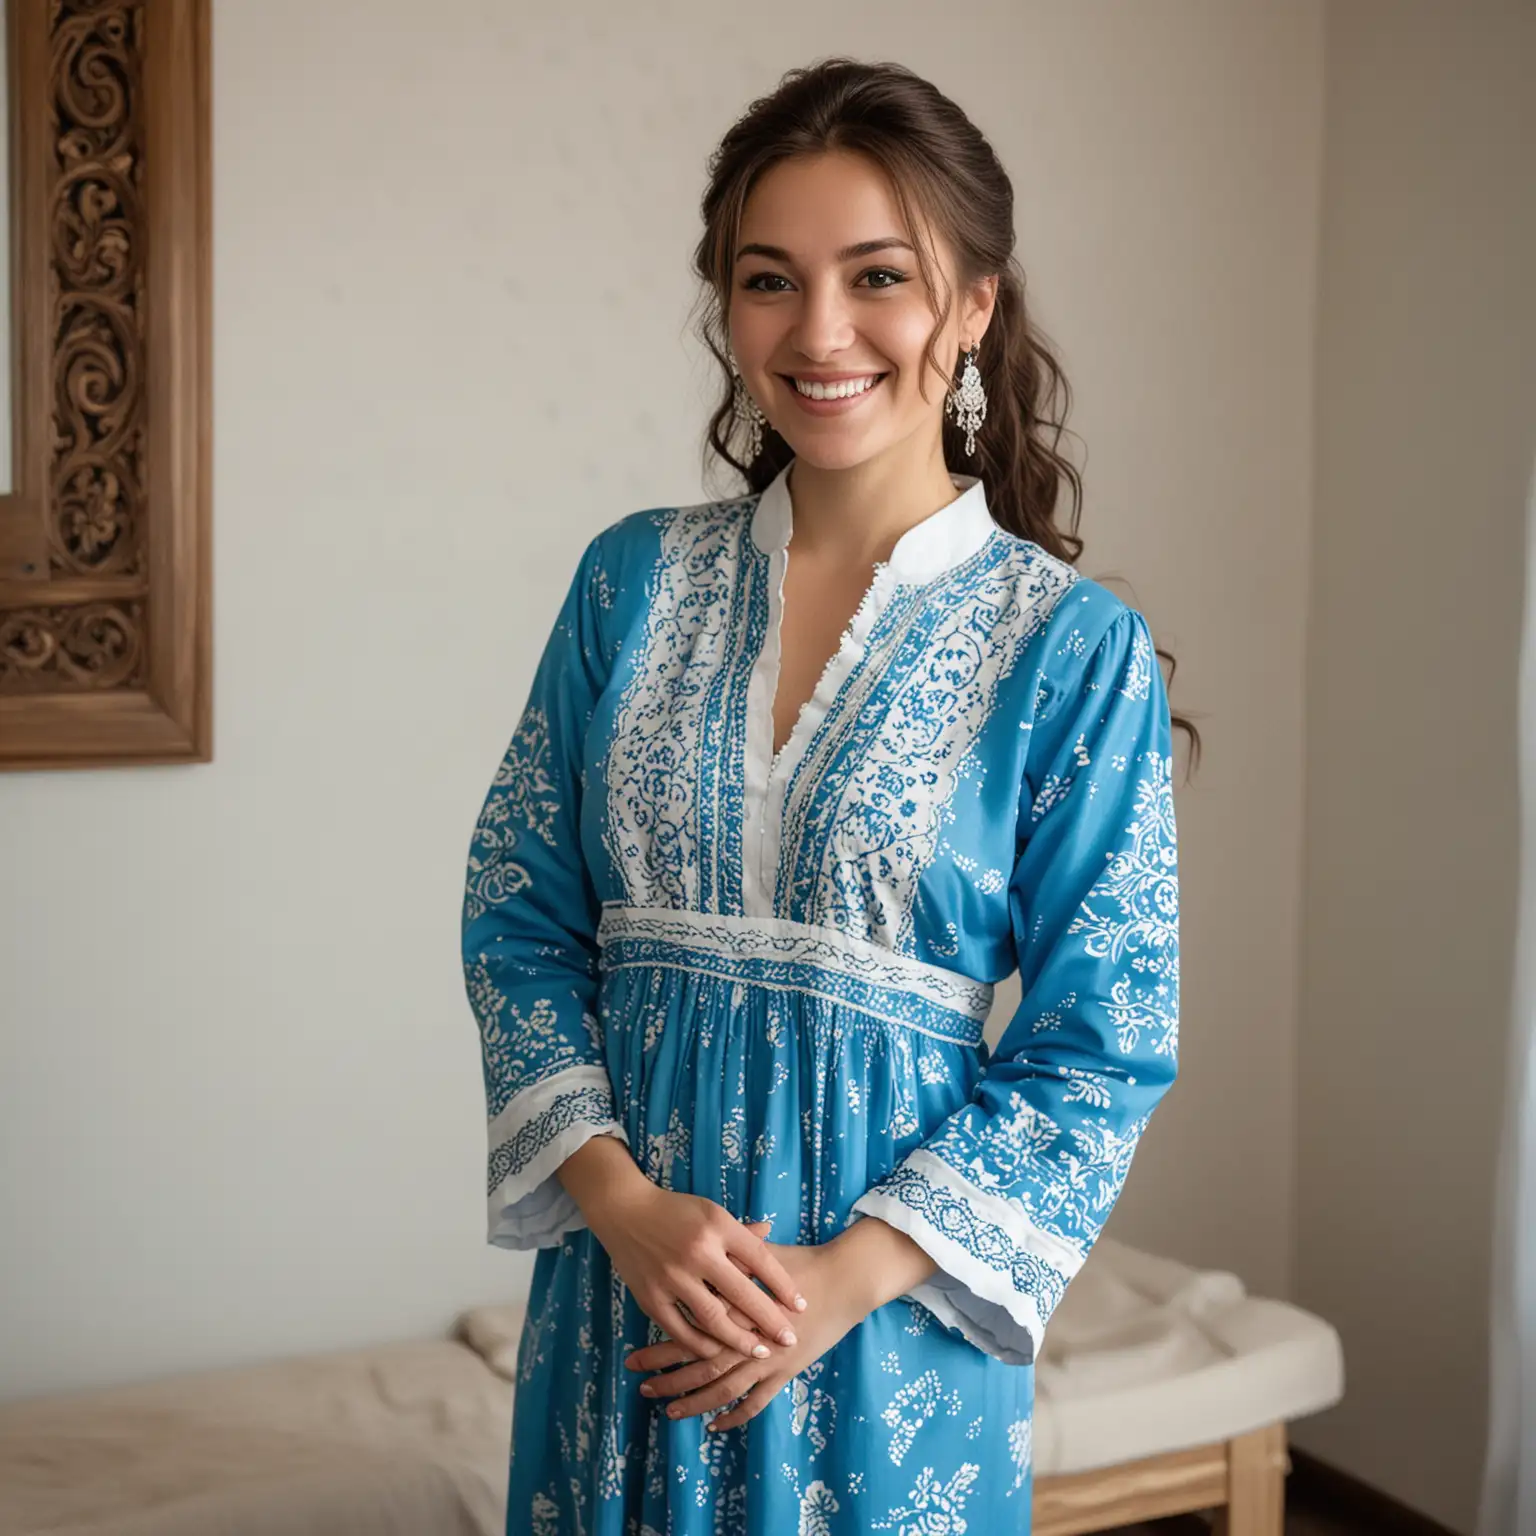 A young Italian american woman in a blue and white traditional kazakh woman's dress and smiling at a spa. She is pregnant.